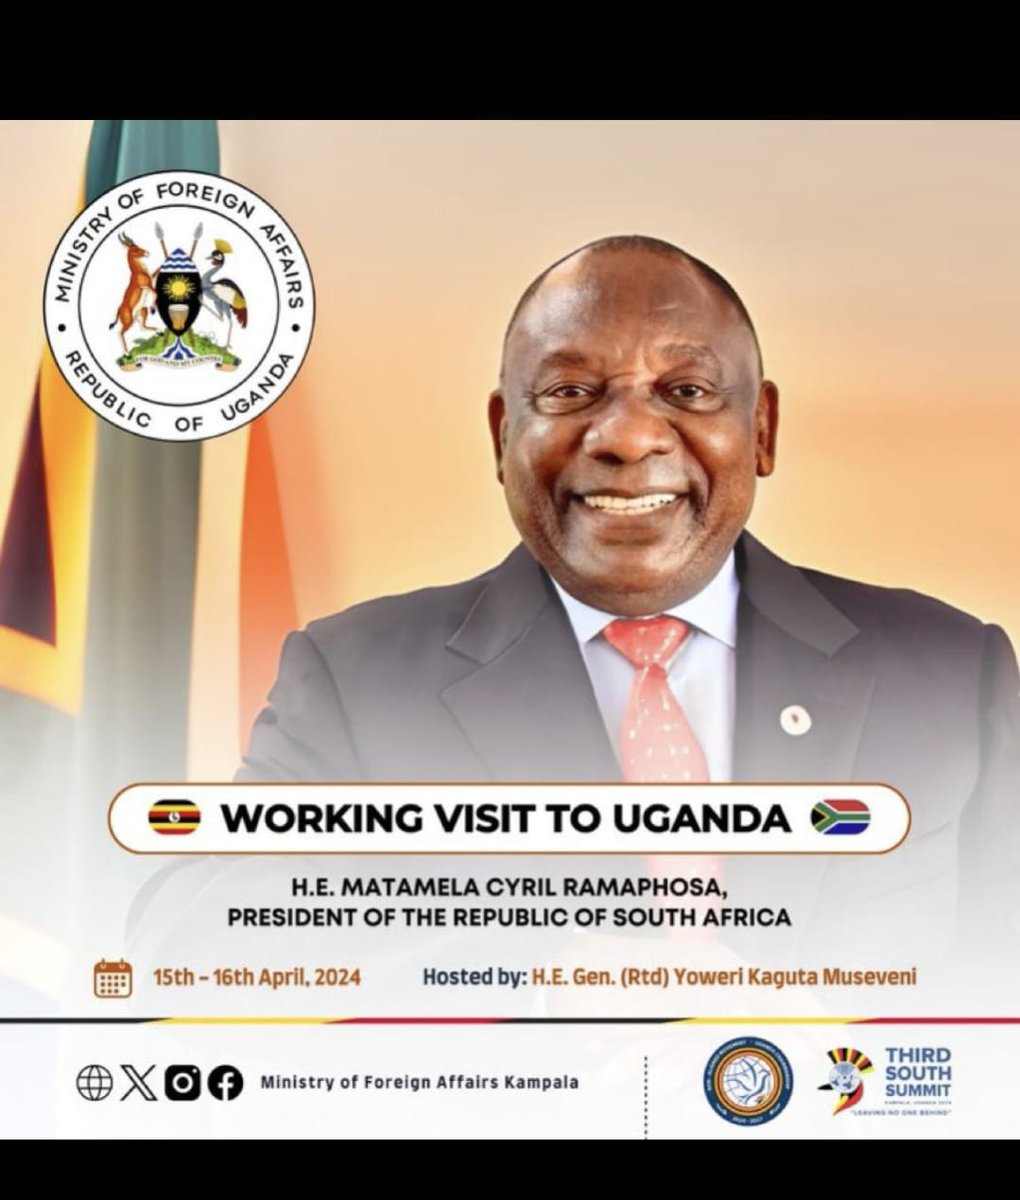 Meanwhile on his way to #Kampala Uganda another country 'very' close to M23 matters... 

Connect dots